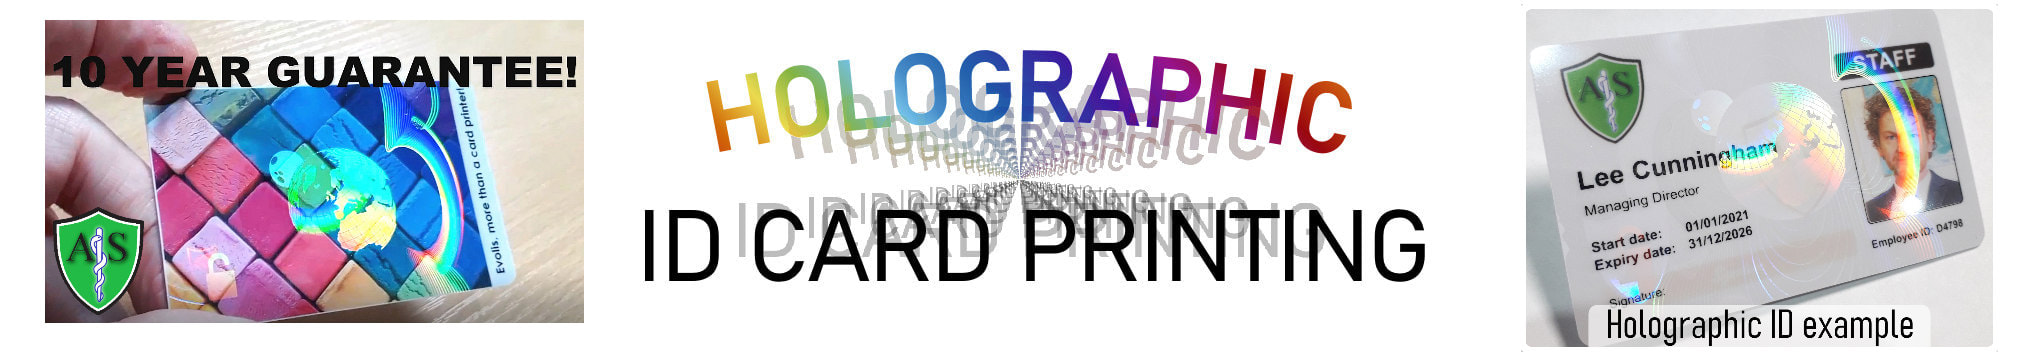 Salford holographic ID card print service. Employee Identity cards with hologram or holograph security mark.